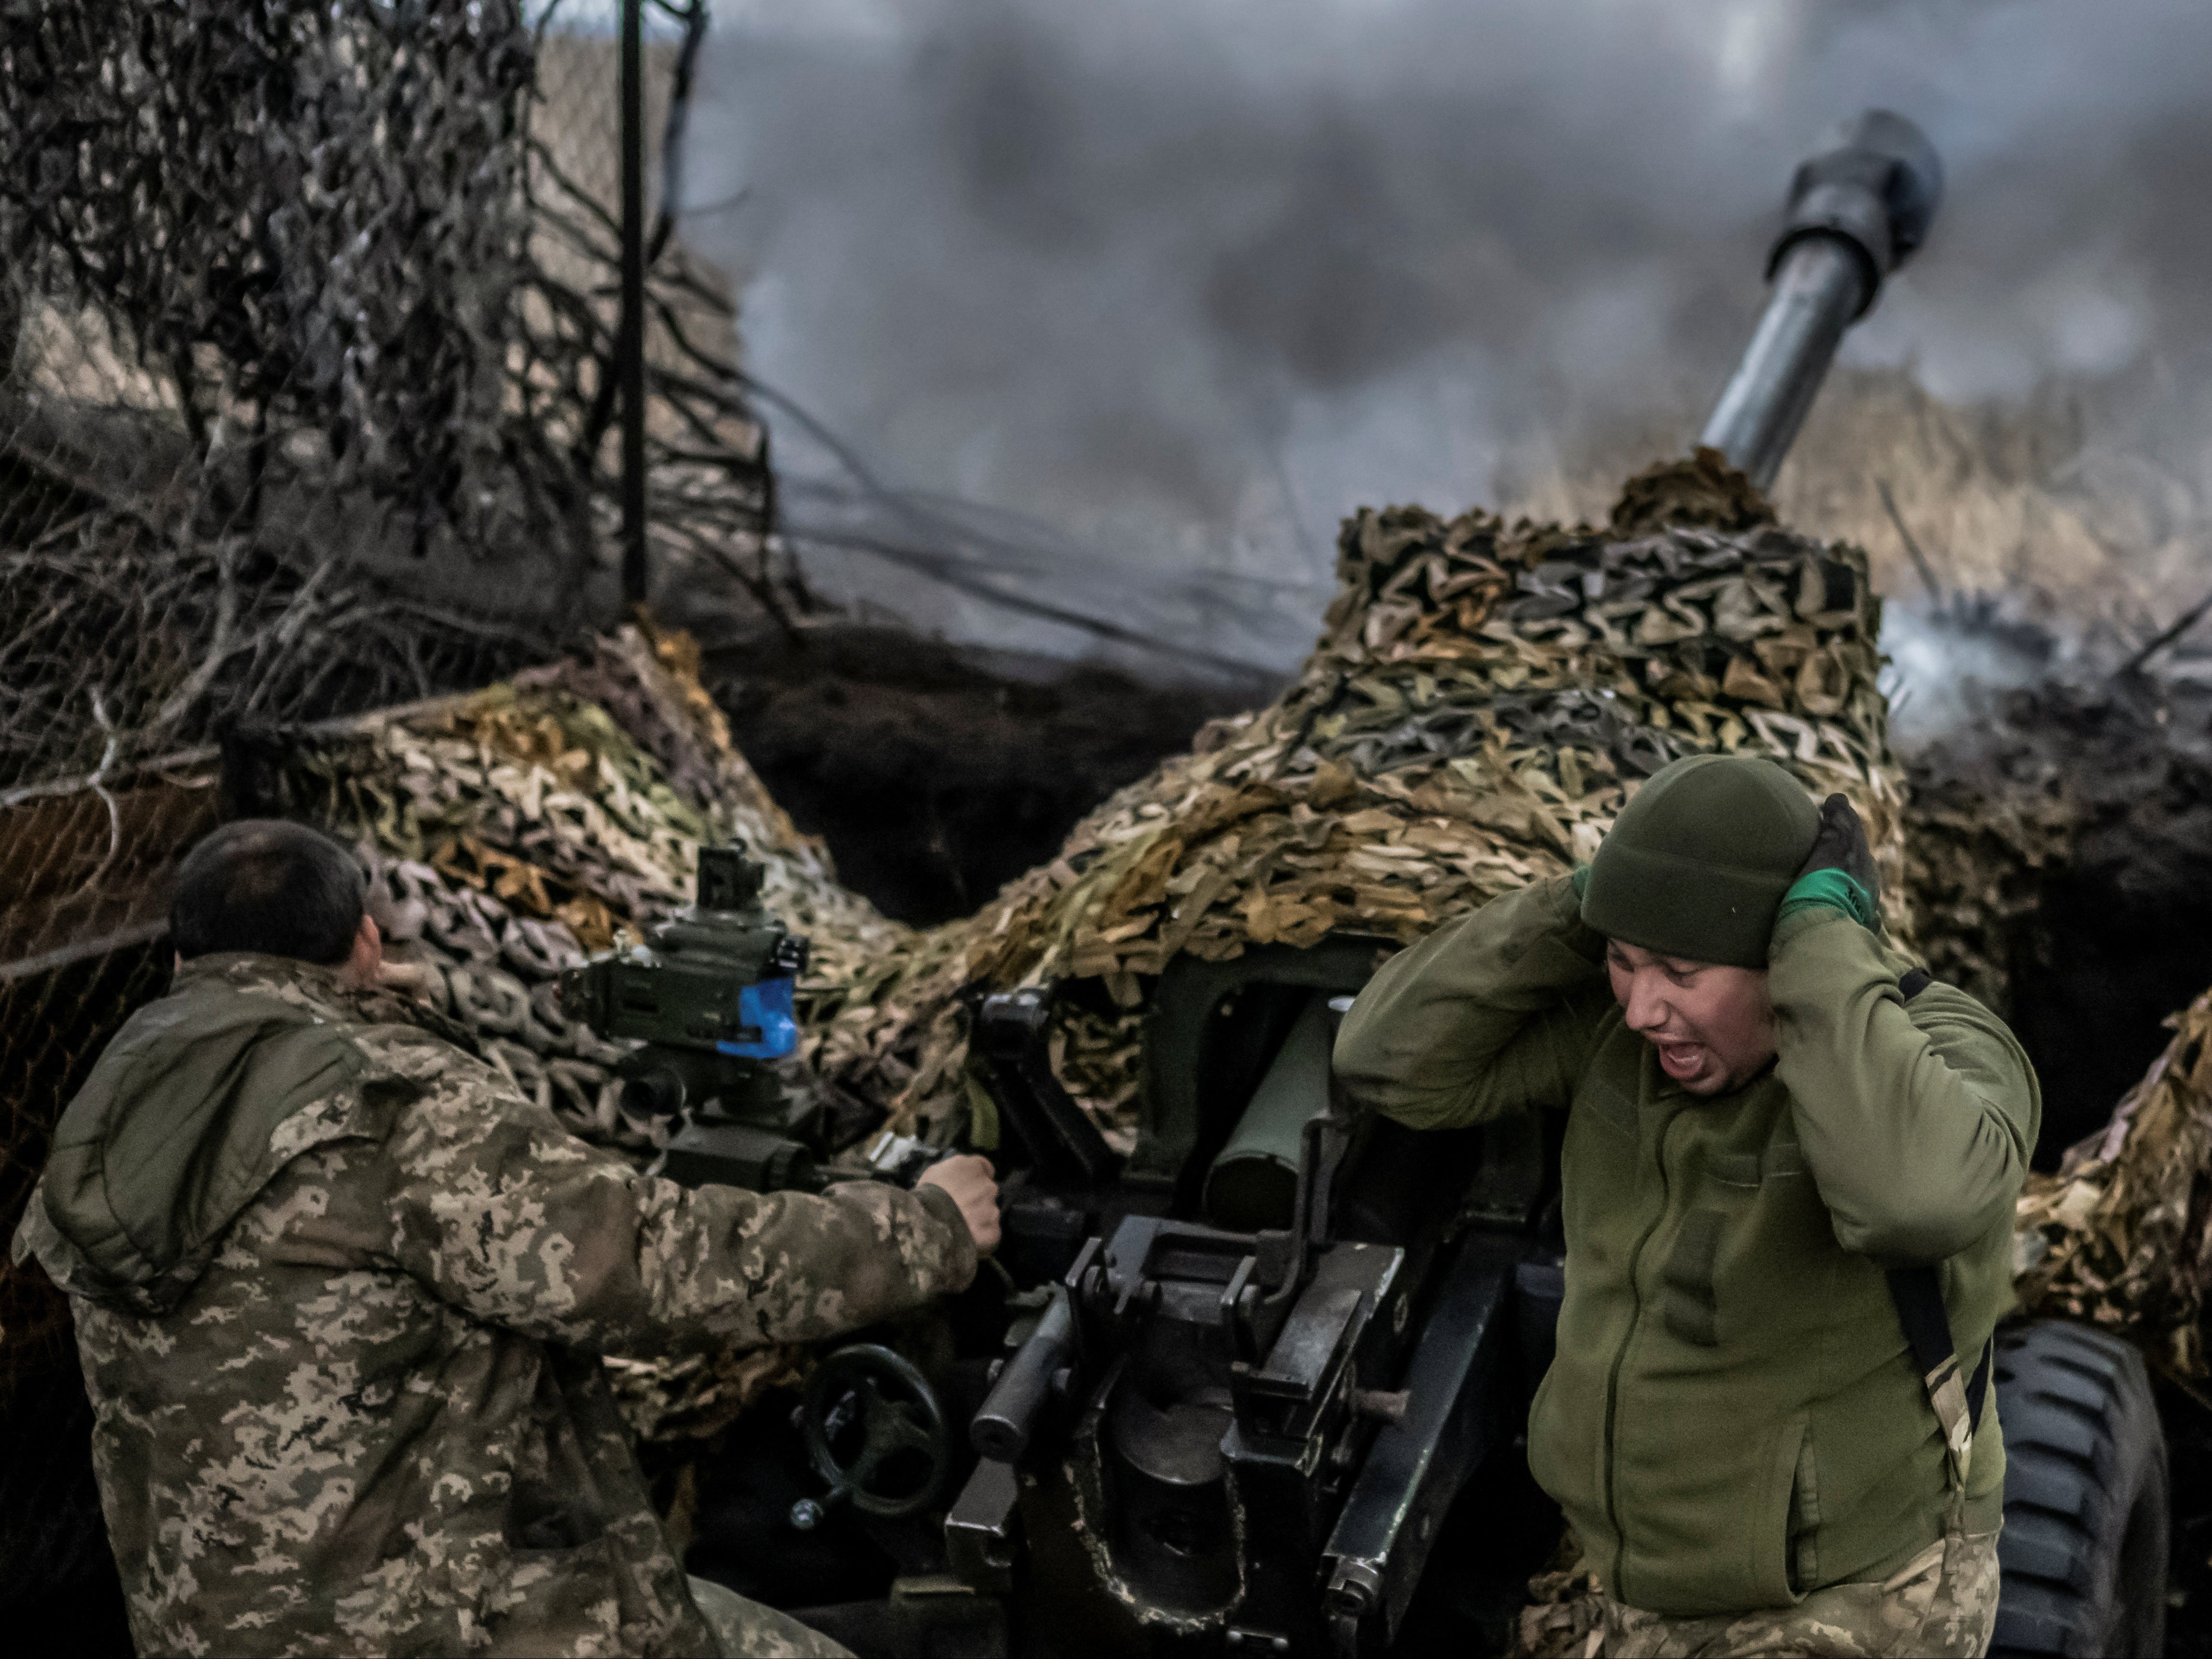 War continues to rage in Ukraine nearly two years after Vladimir Putin’s invasion